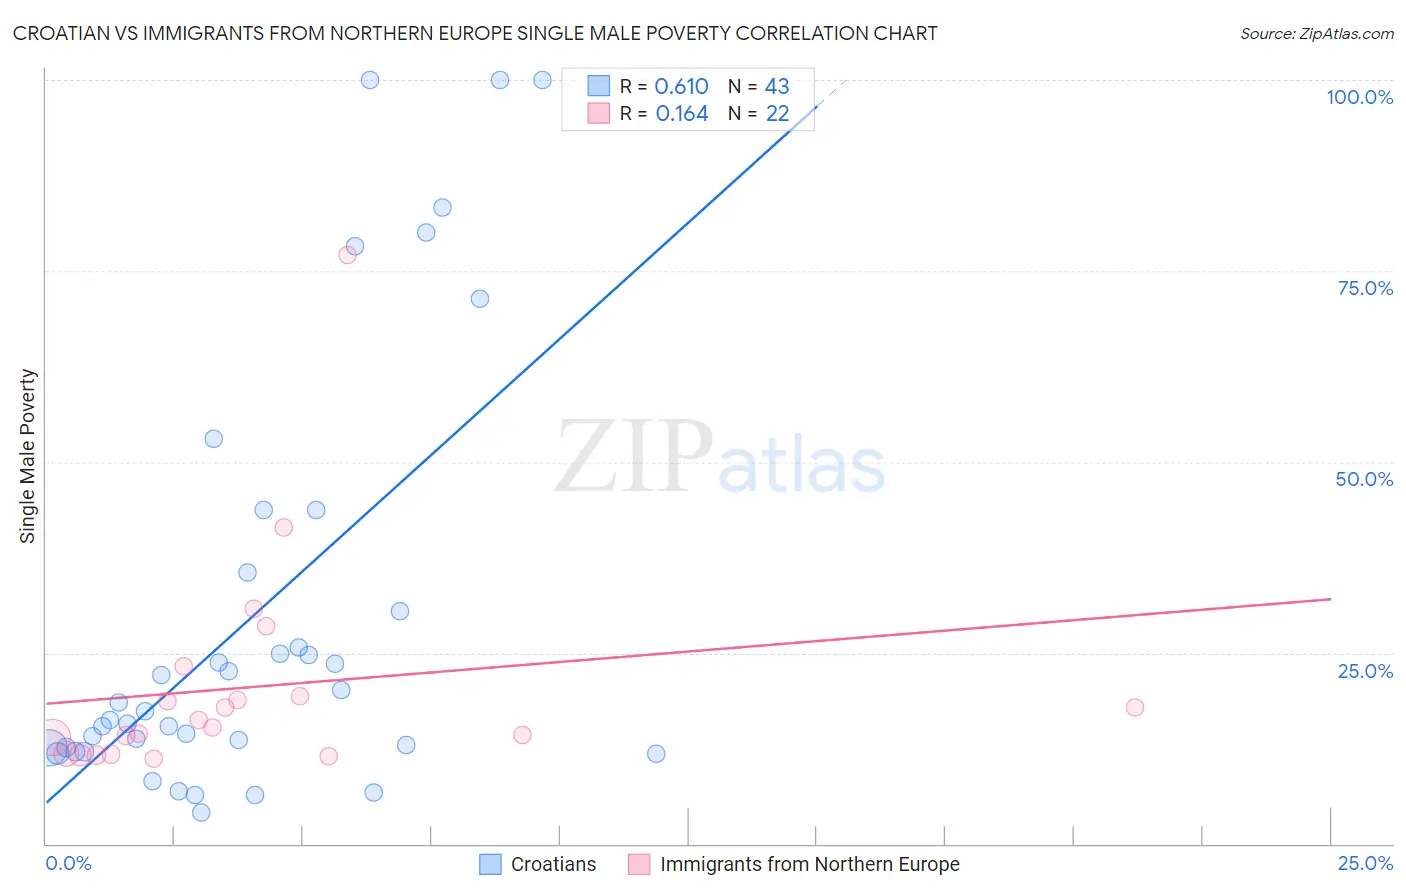 Croatian vs Immigrants from Northern Europe Single Male Poverty